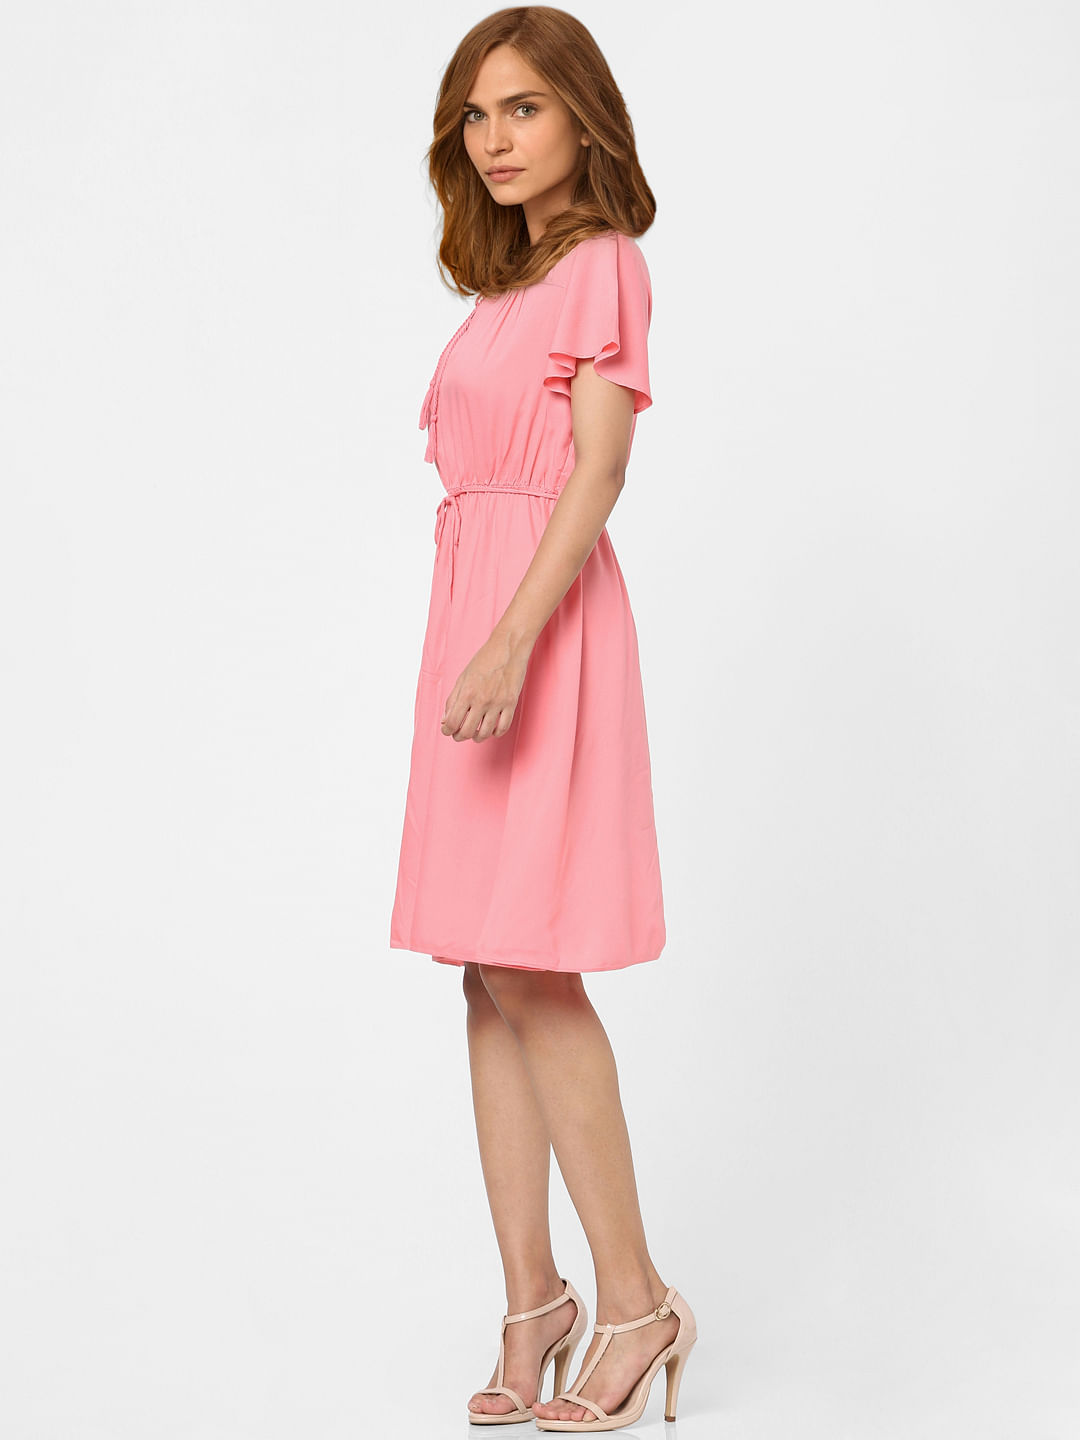 Women's Pink Fit And Flare Dress Long Sleeve Square Neck | Ally Fashion